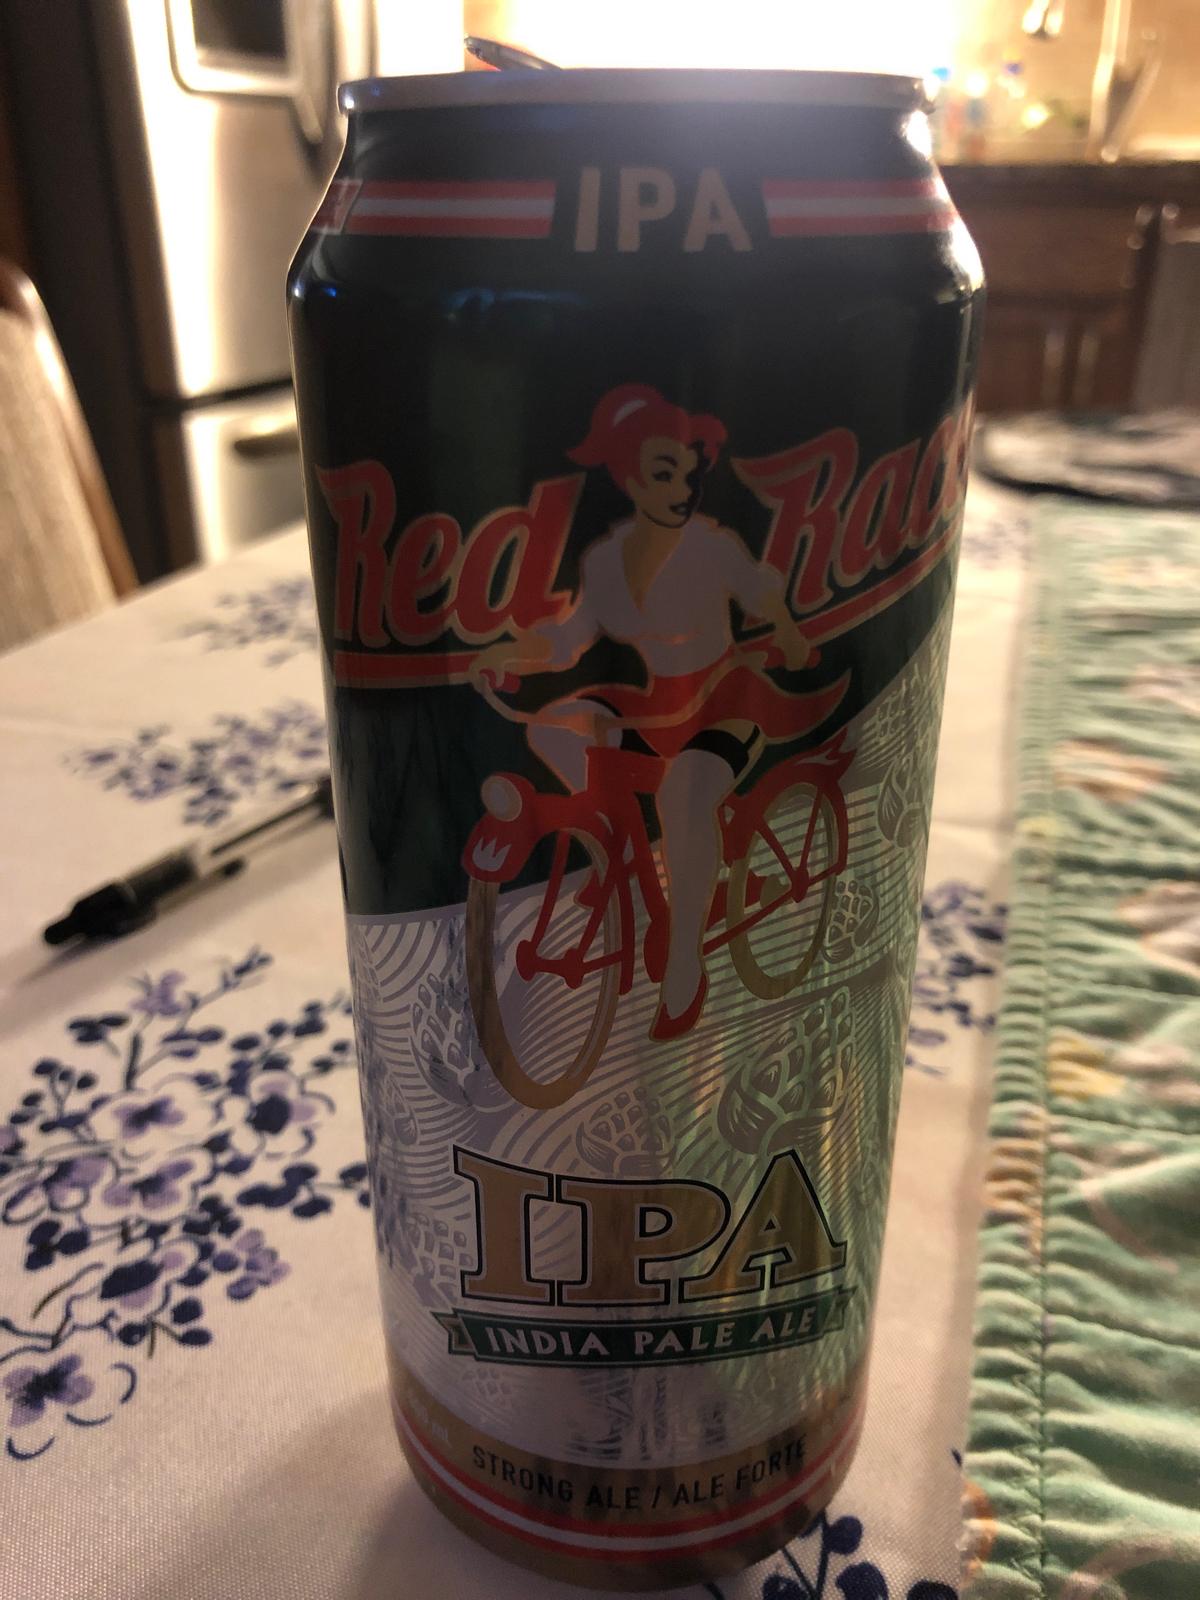 Red Racer IPA (India Pale Ale)